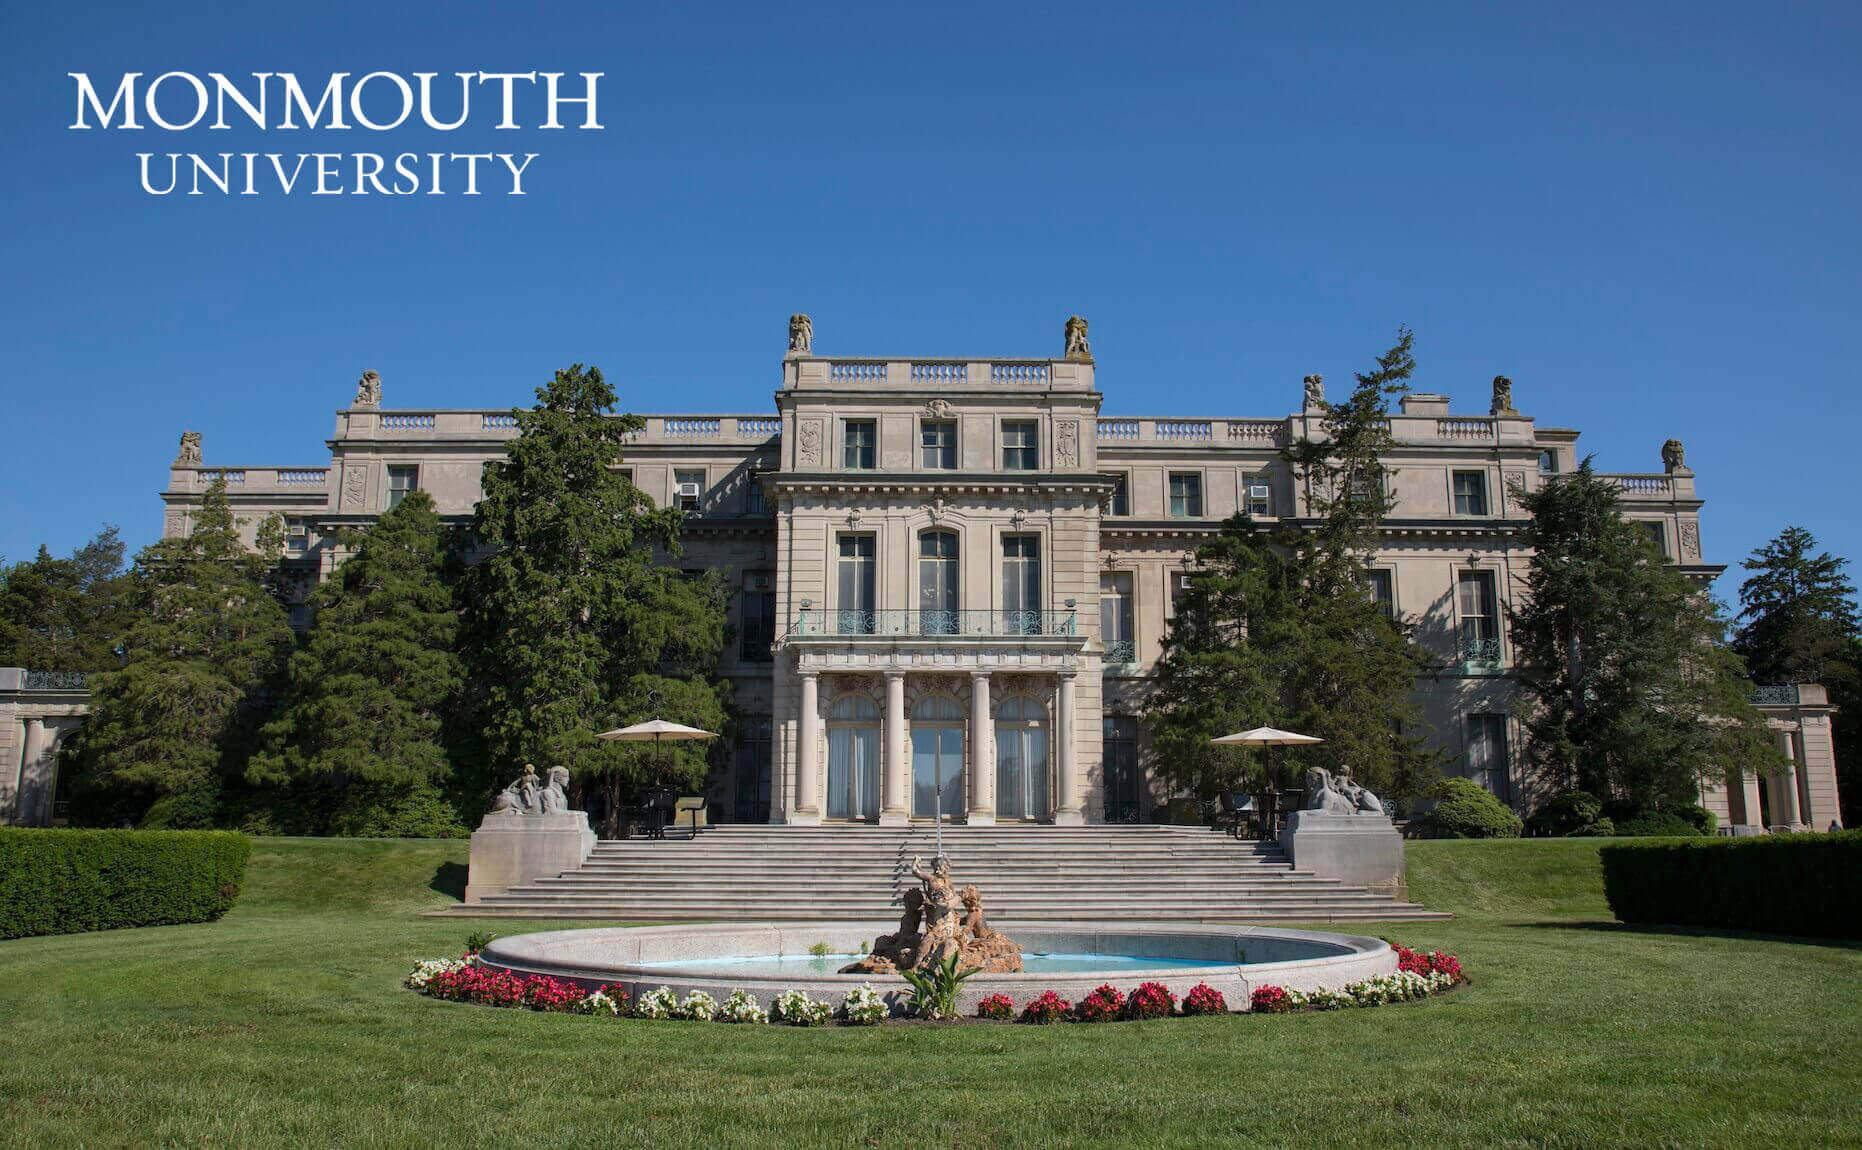 MBA and MS Monmouth University